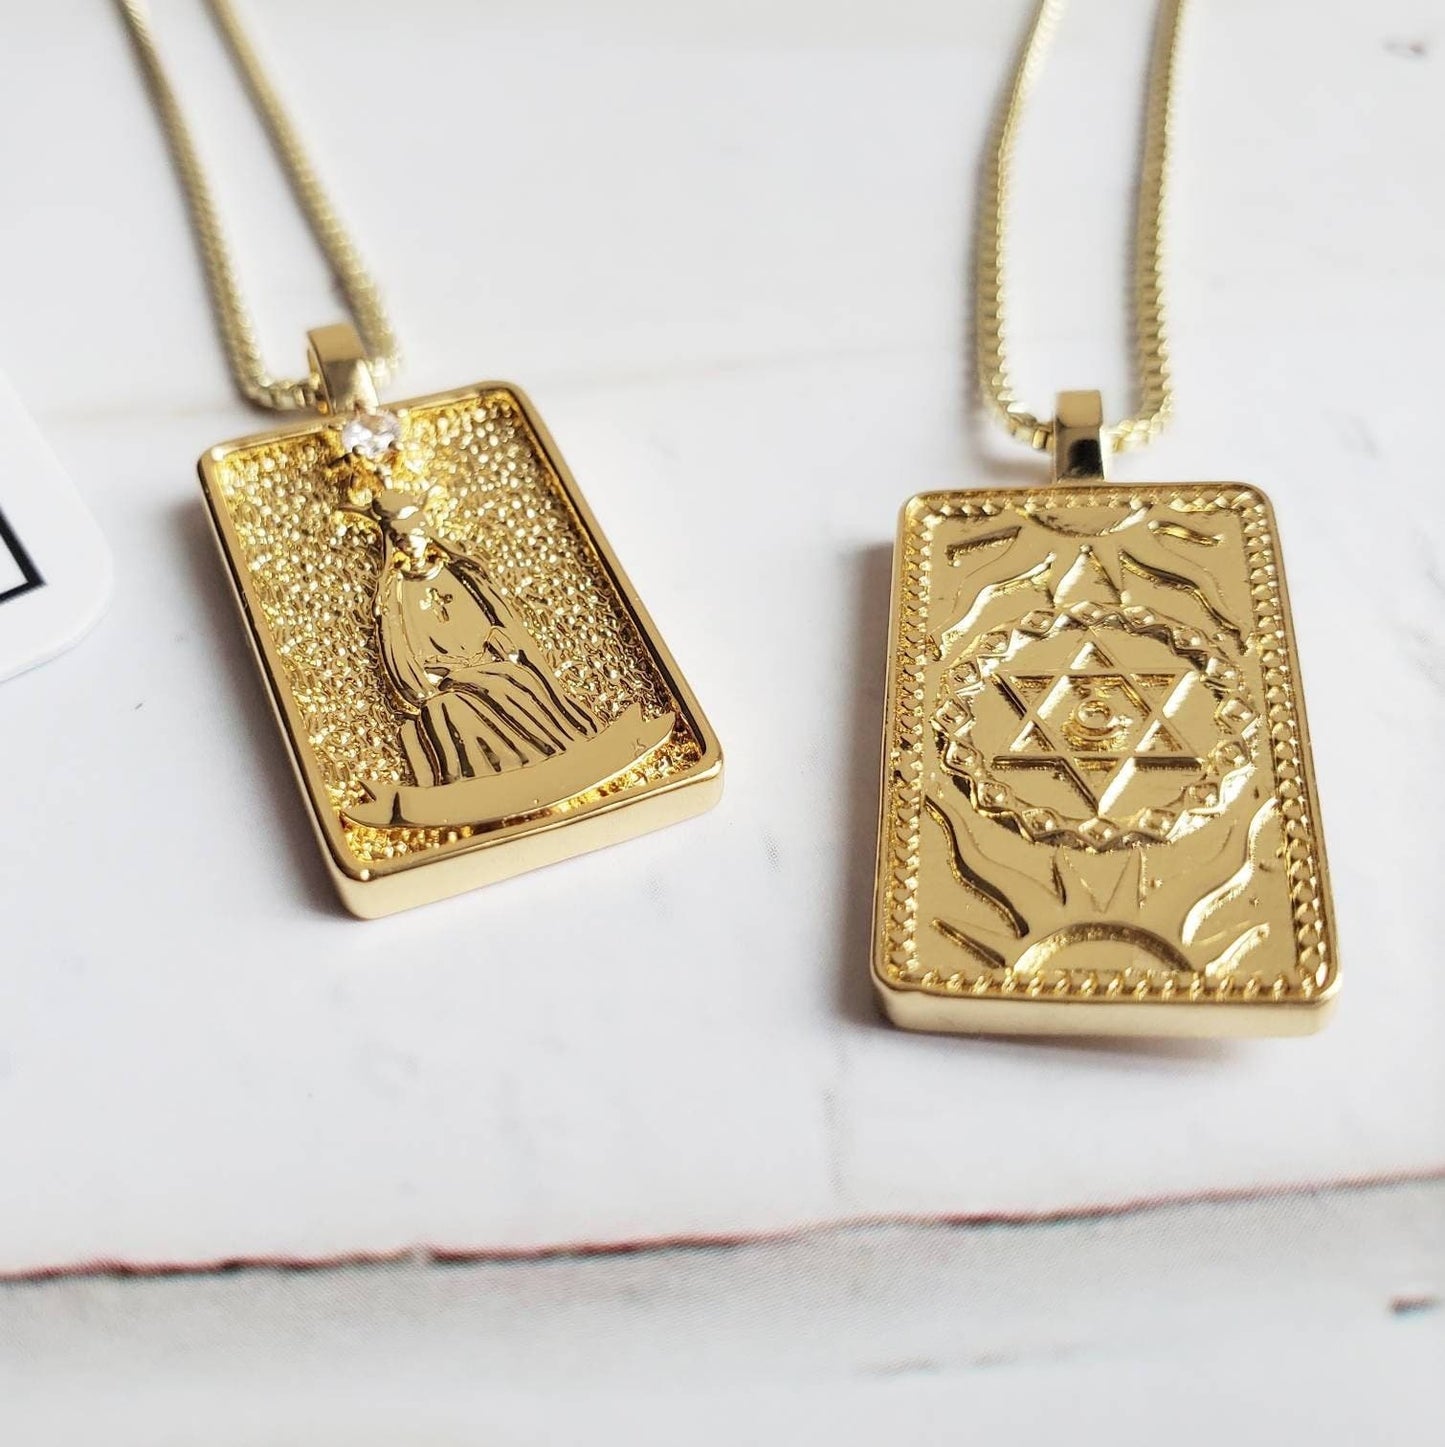 THE HIGH PRIESTESS Tarot Deck Card Necklace | 14K Gold Box Chain Pendant Necklace | Delicate, Minimalist Intention Necklace | Tarot Jewelry